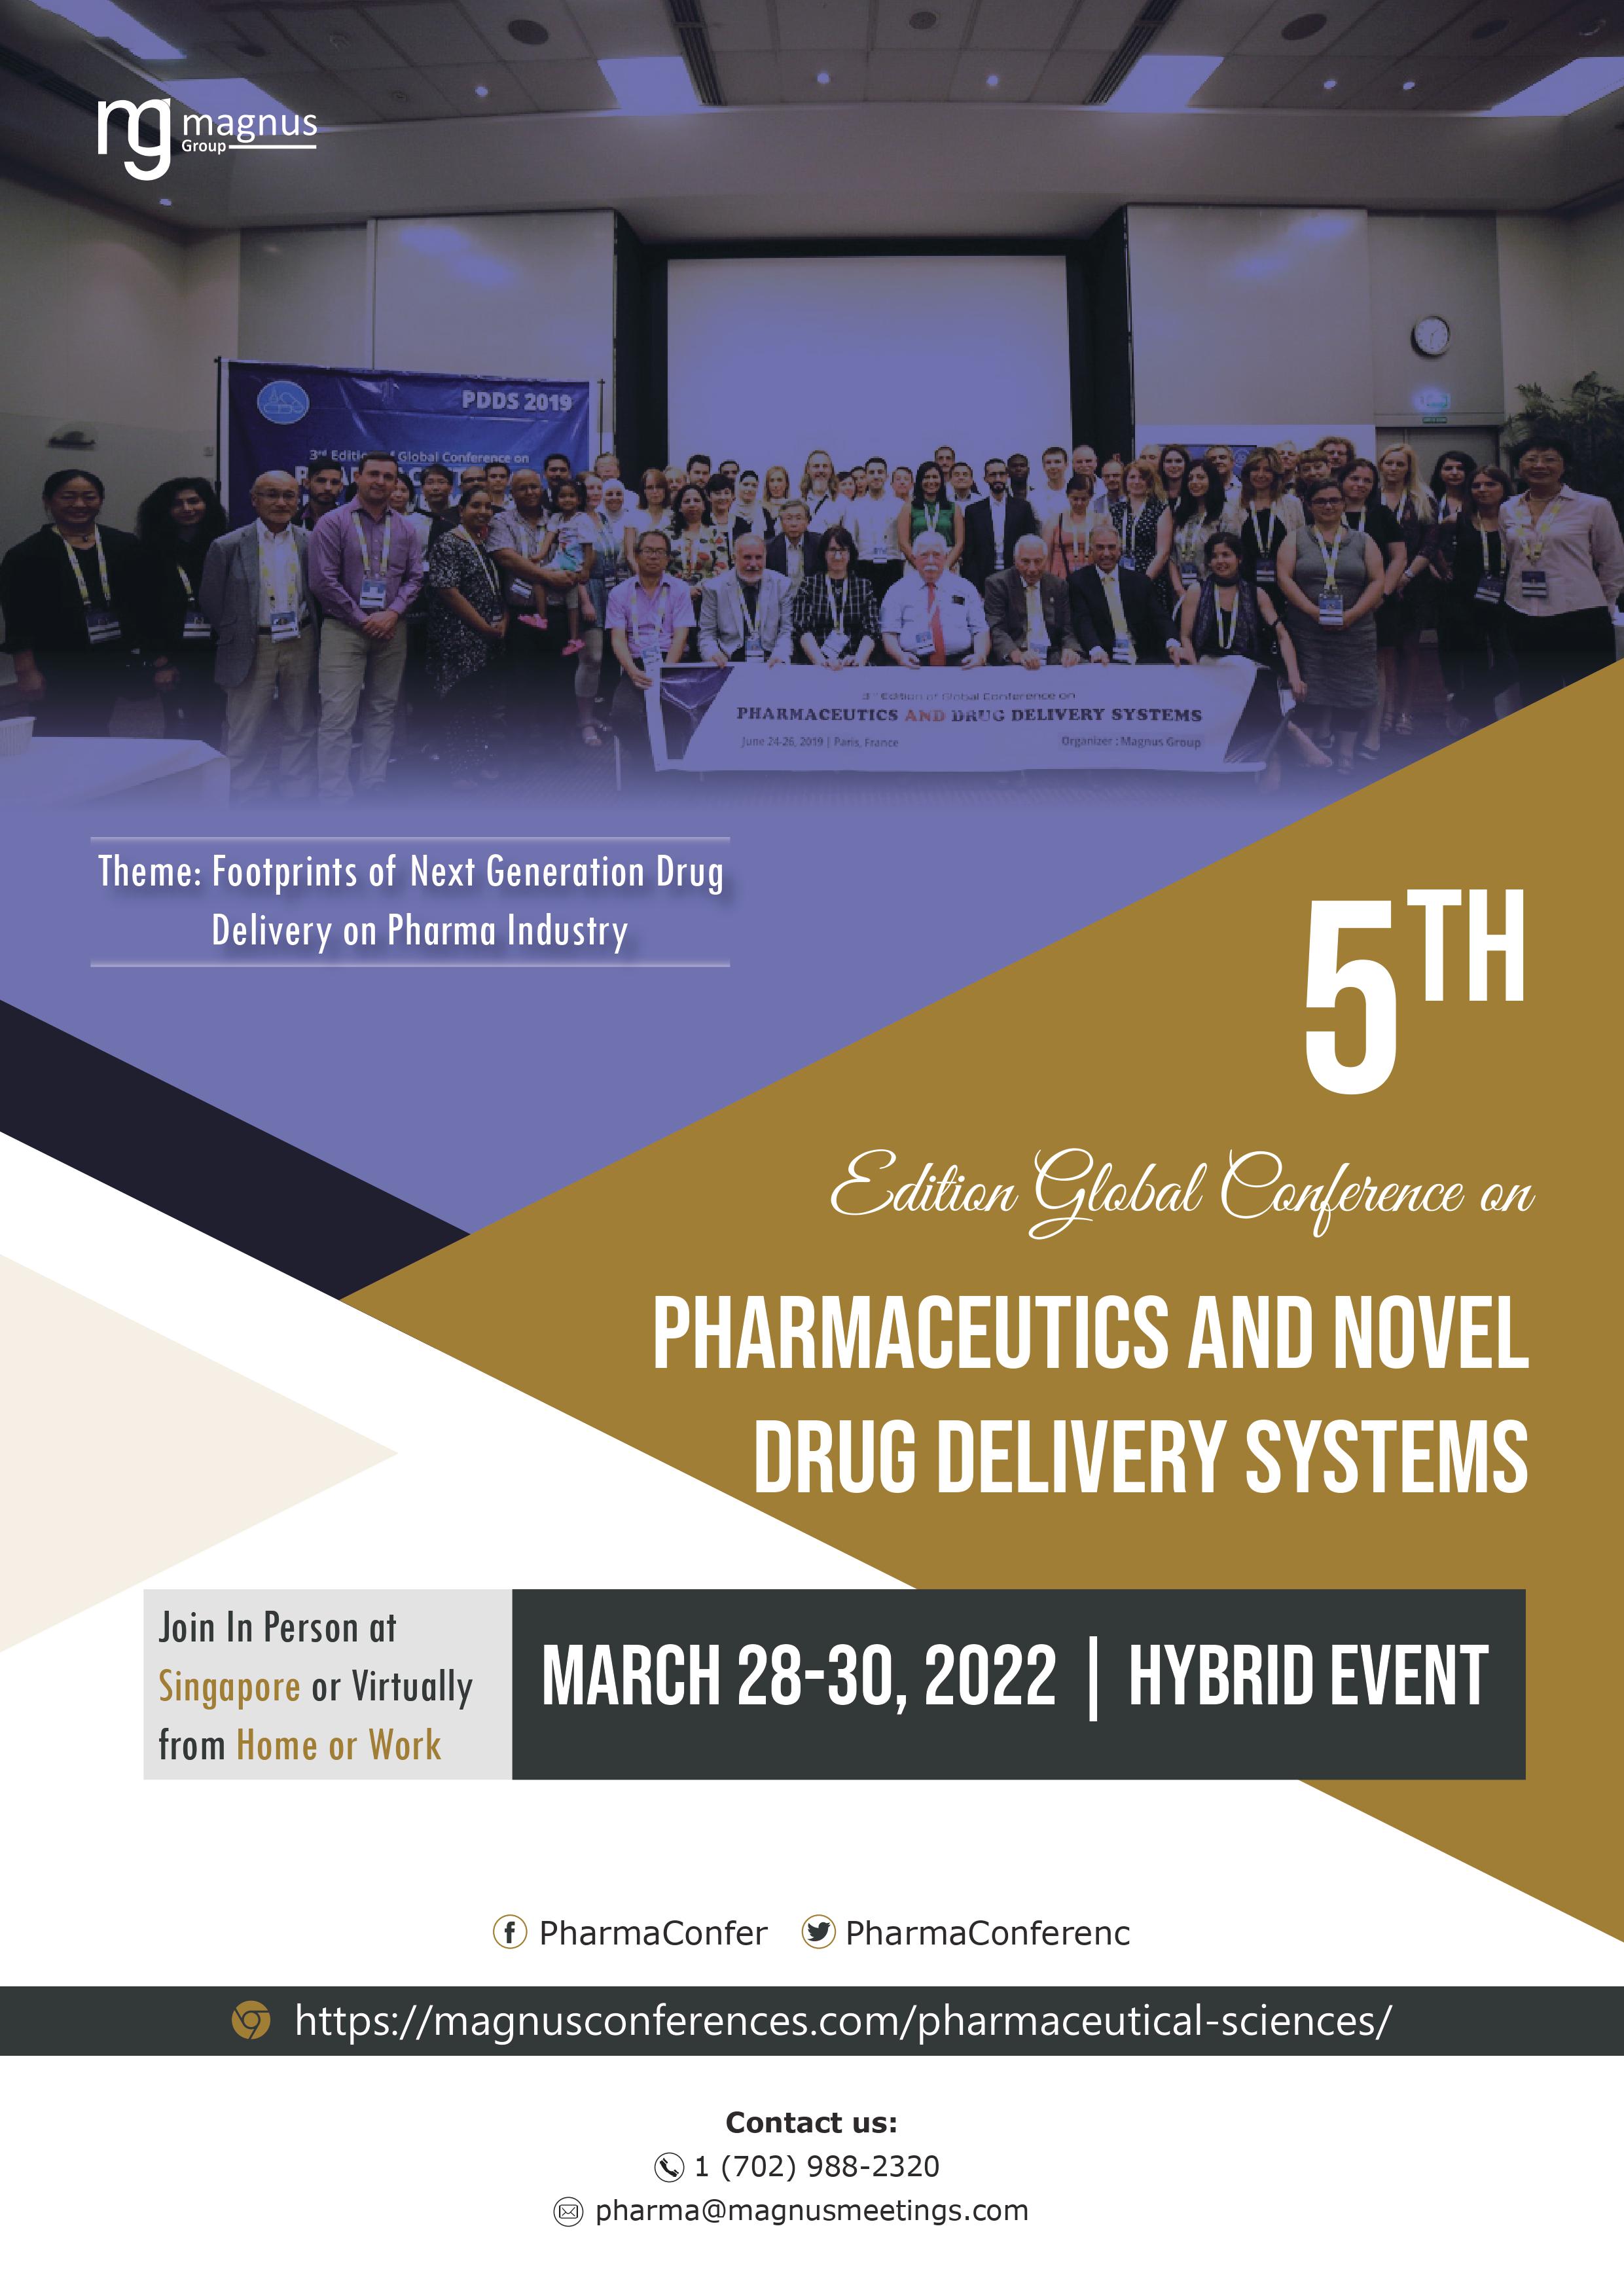 5th Edition of Global Conference on Pharmaceutics and Novel Drug Delivery Systems, Singapore